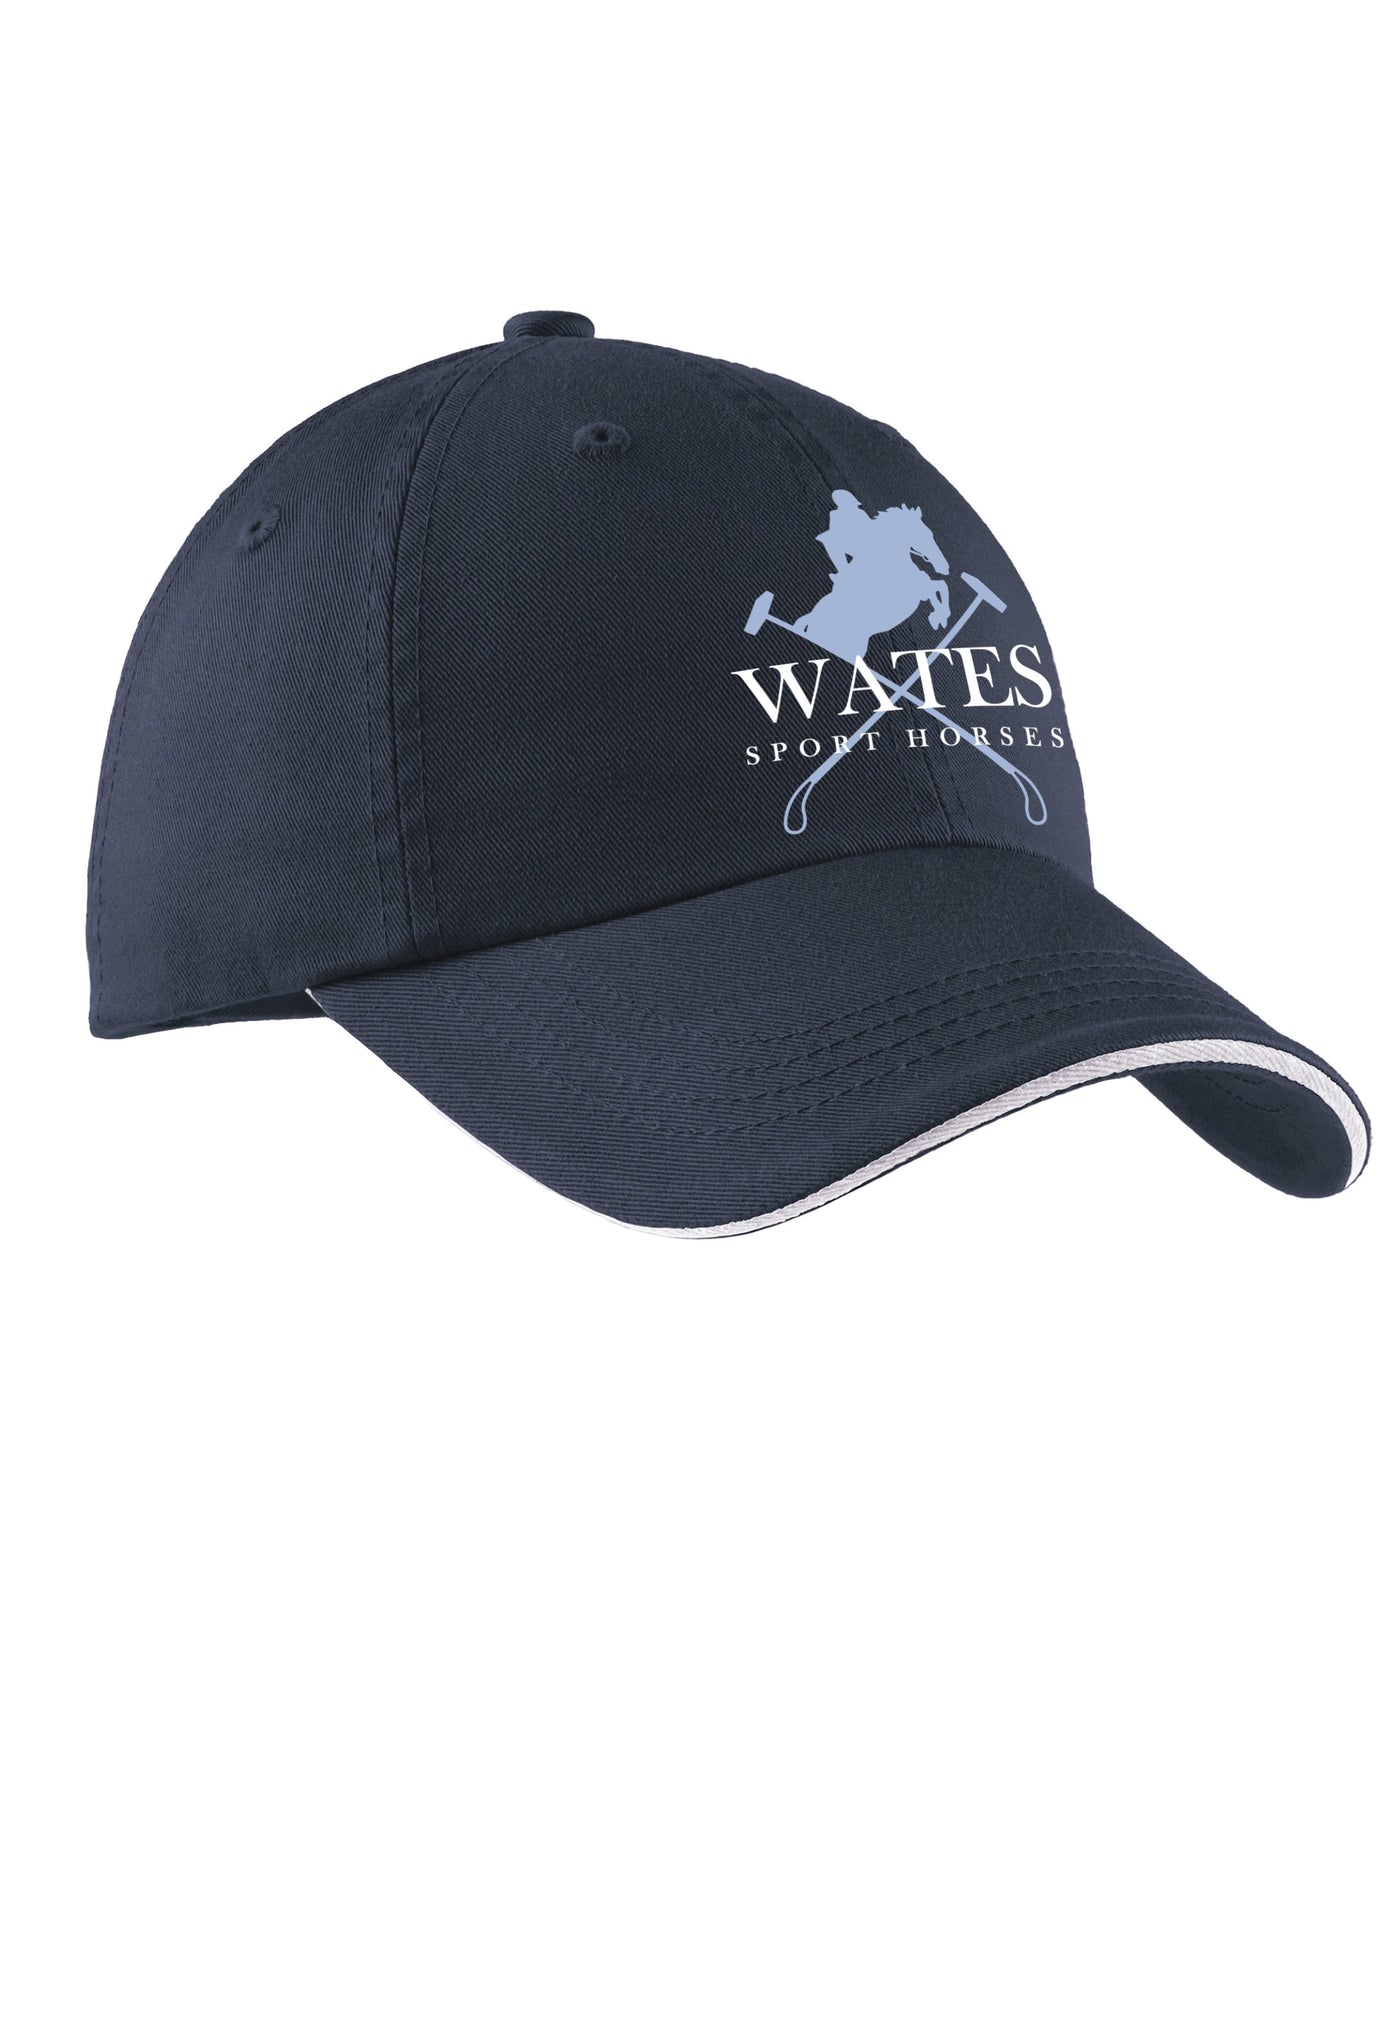 Wates Sport Horses Port Authority® Sandwich Bill Cap with Striped Closure